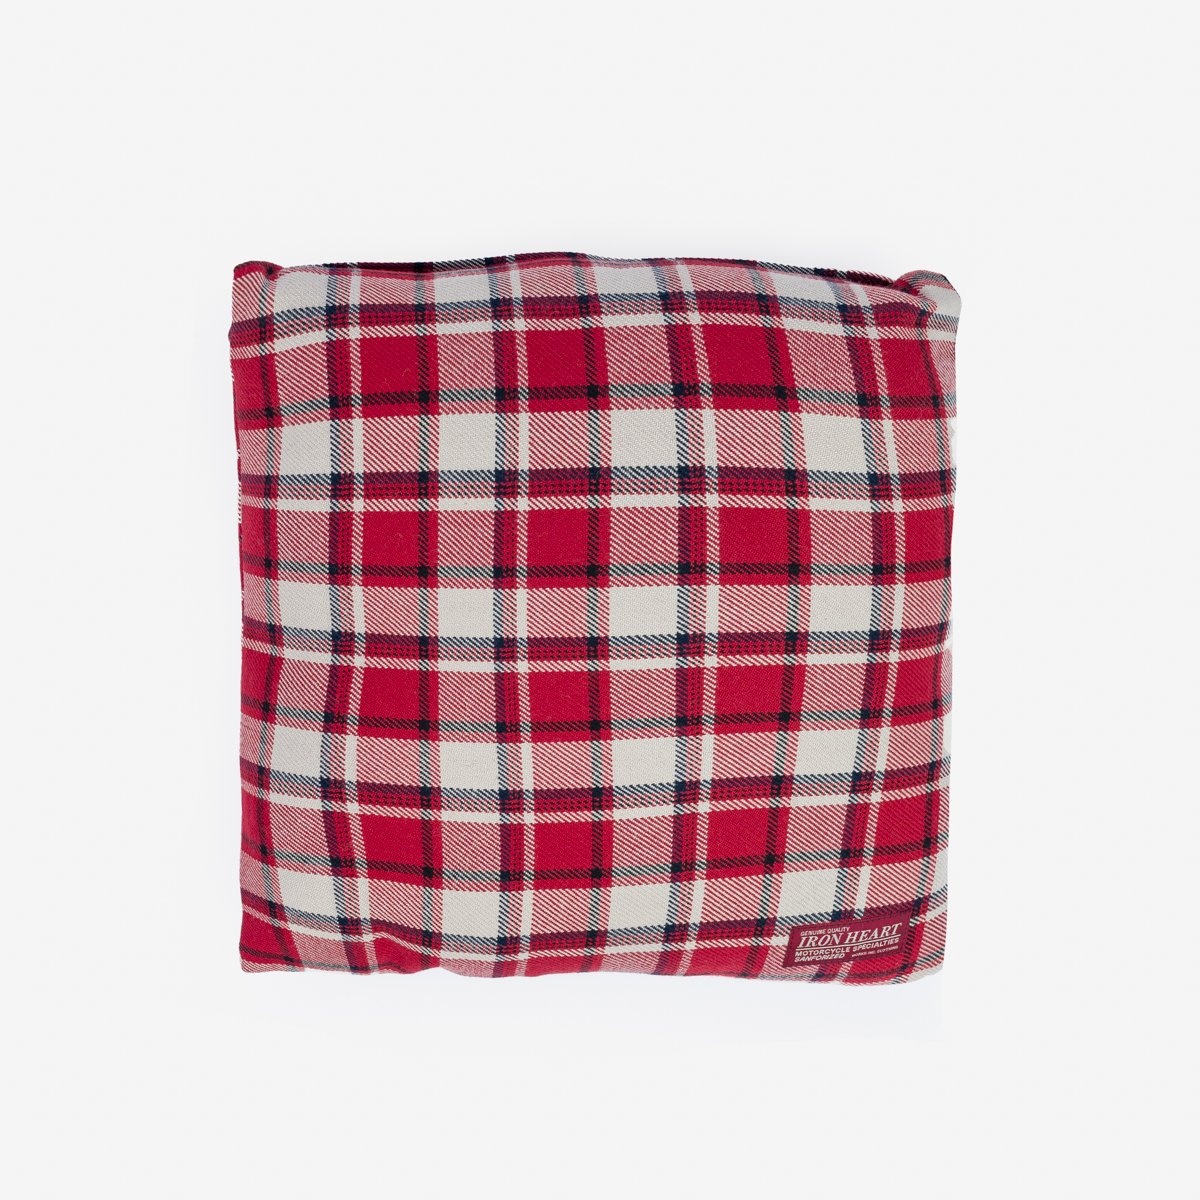 IHG-103-REDCRM Ultra Heavy Flannel Classic Check Cushion Cover - Red/Cream - 1